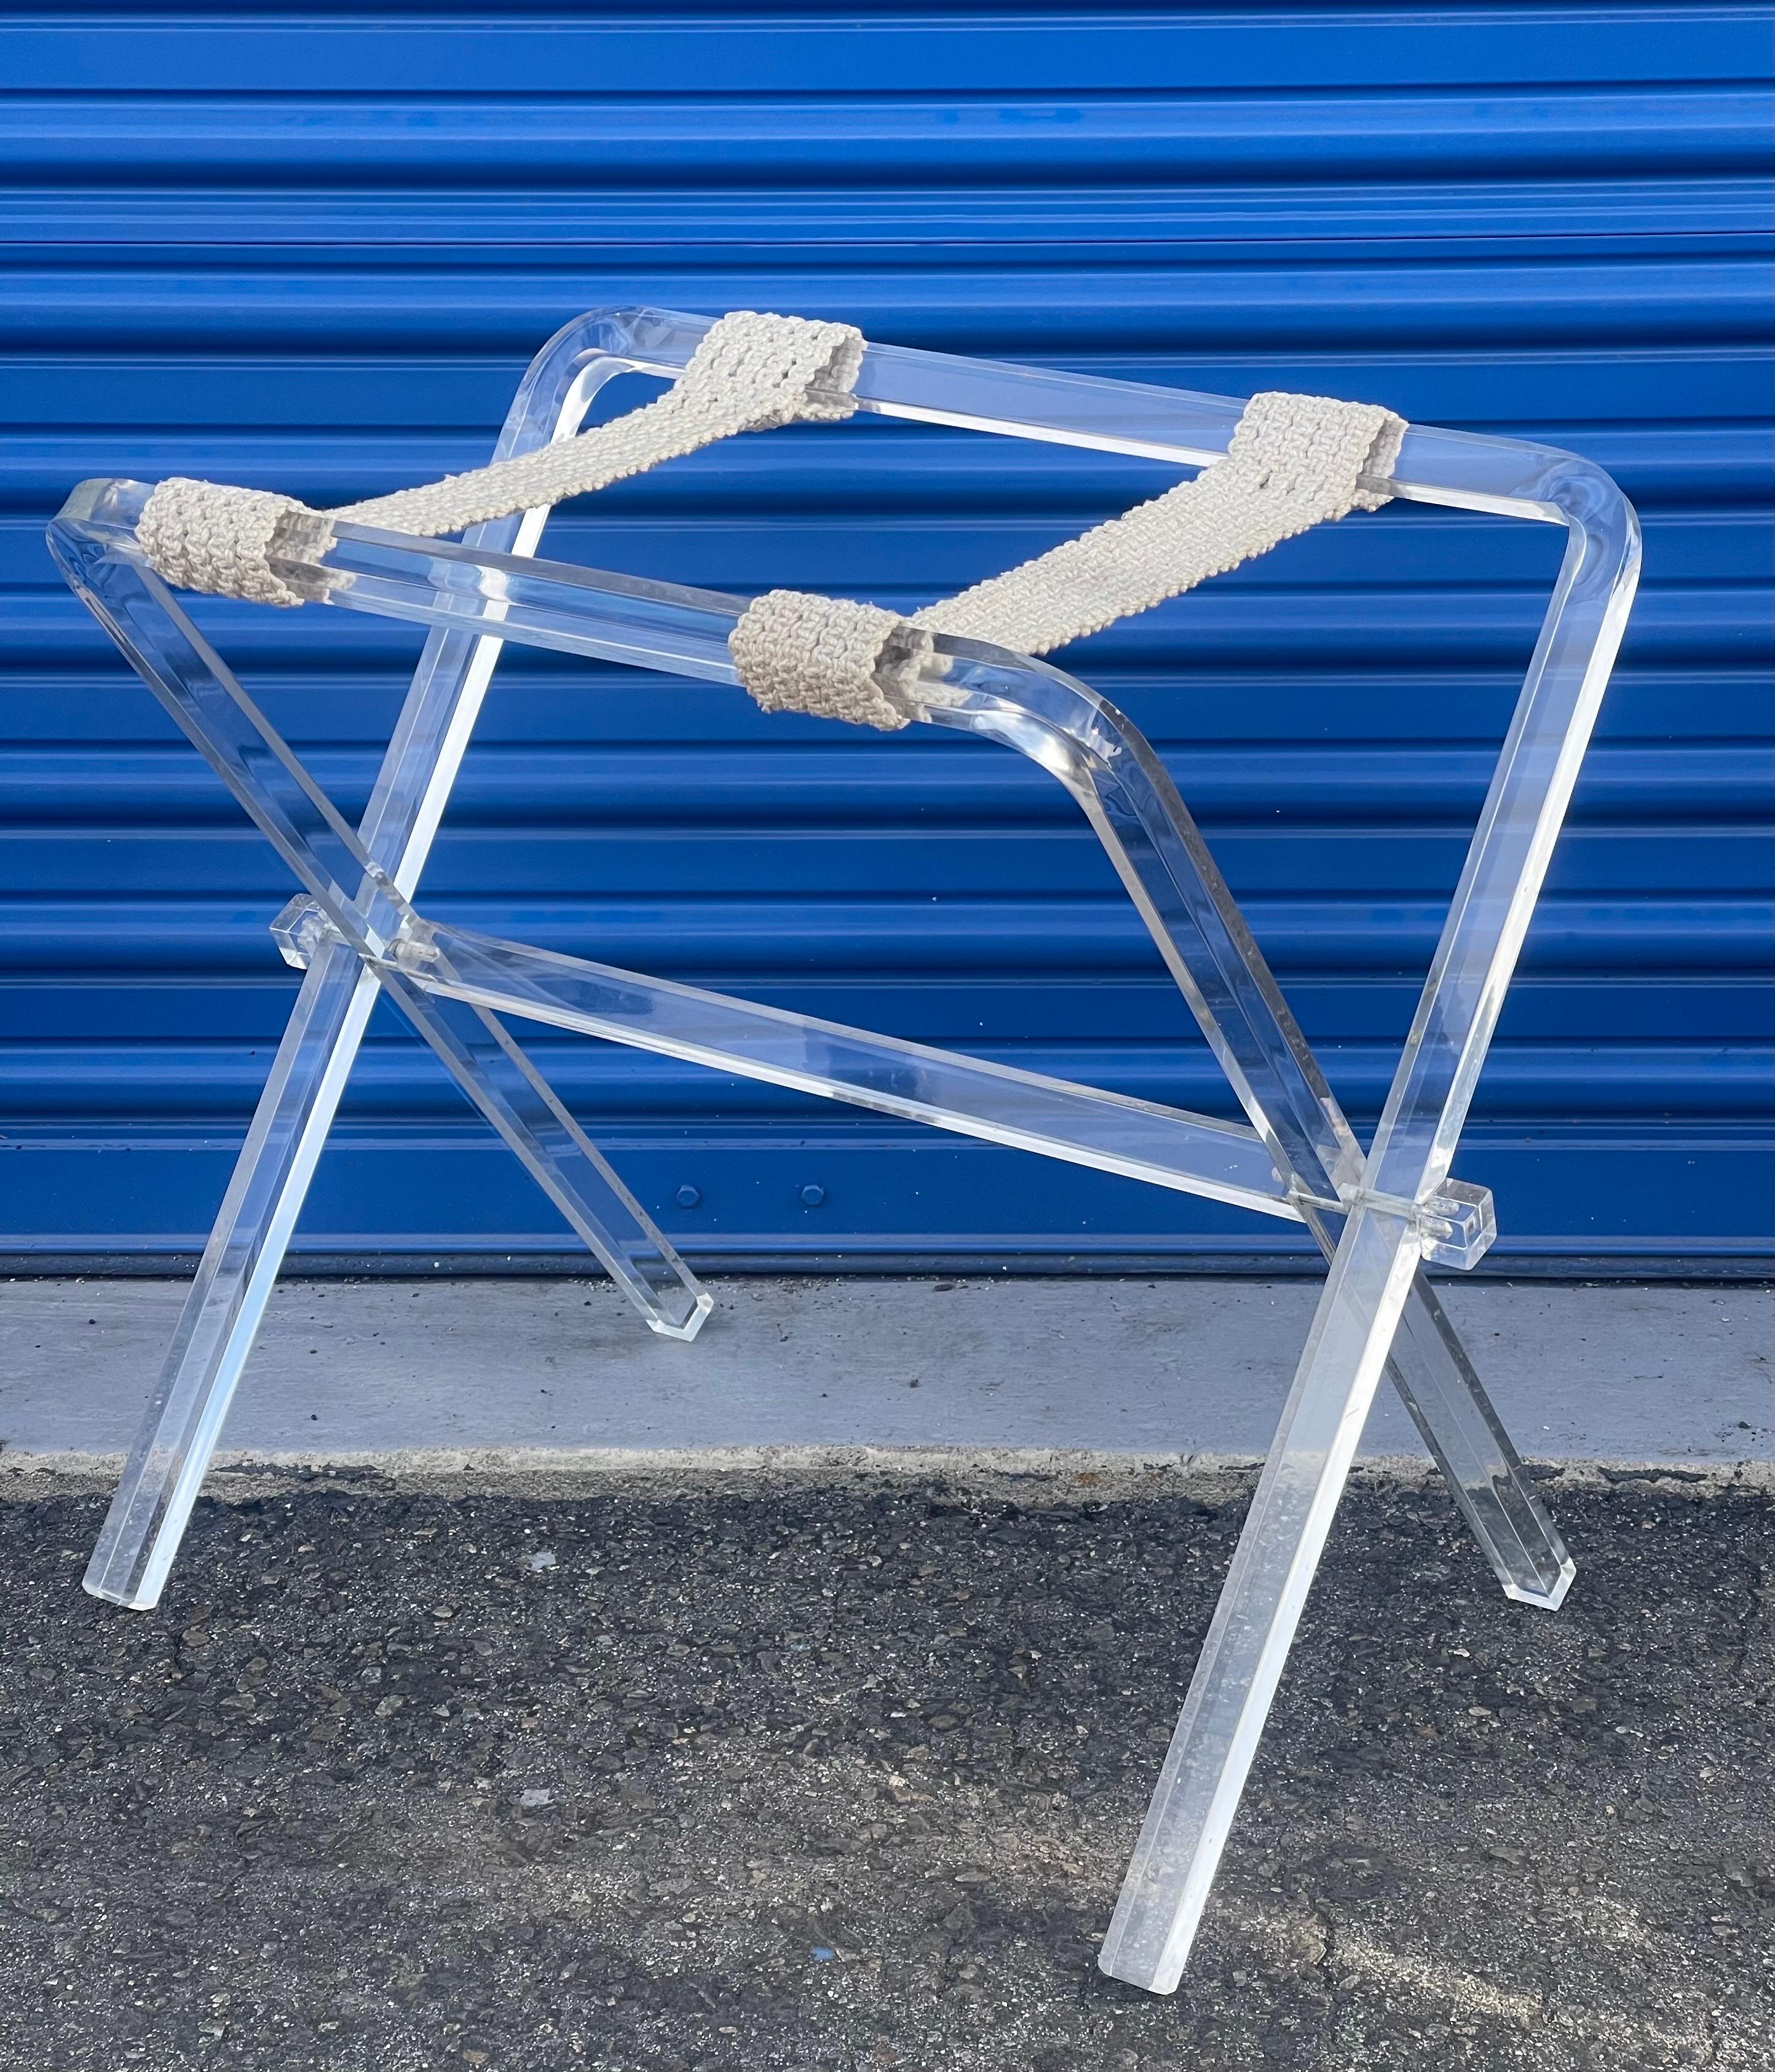 A really nice vintage lucite and macrame folding luggage rack by Creations At Dallas, circa 1970s.  The piece features two white macrame straps on a folding lucite base. The luggage stand is marked ‘Creations at Dallas’ to the lower part of one of